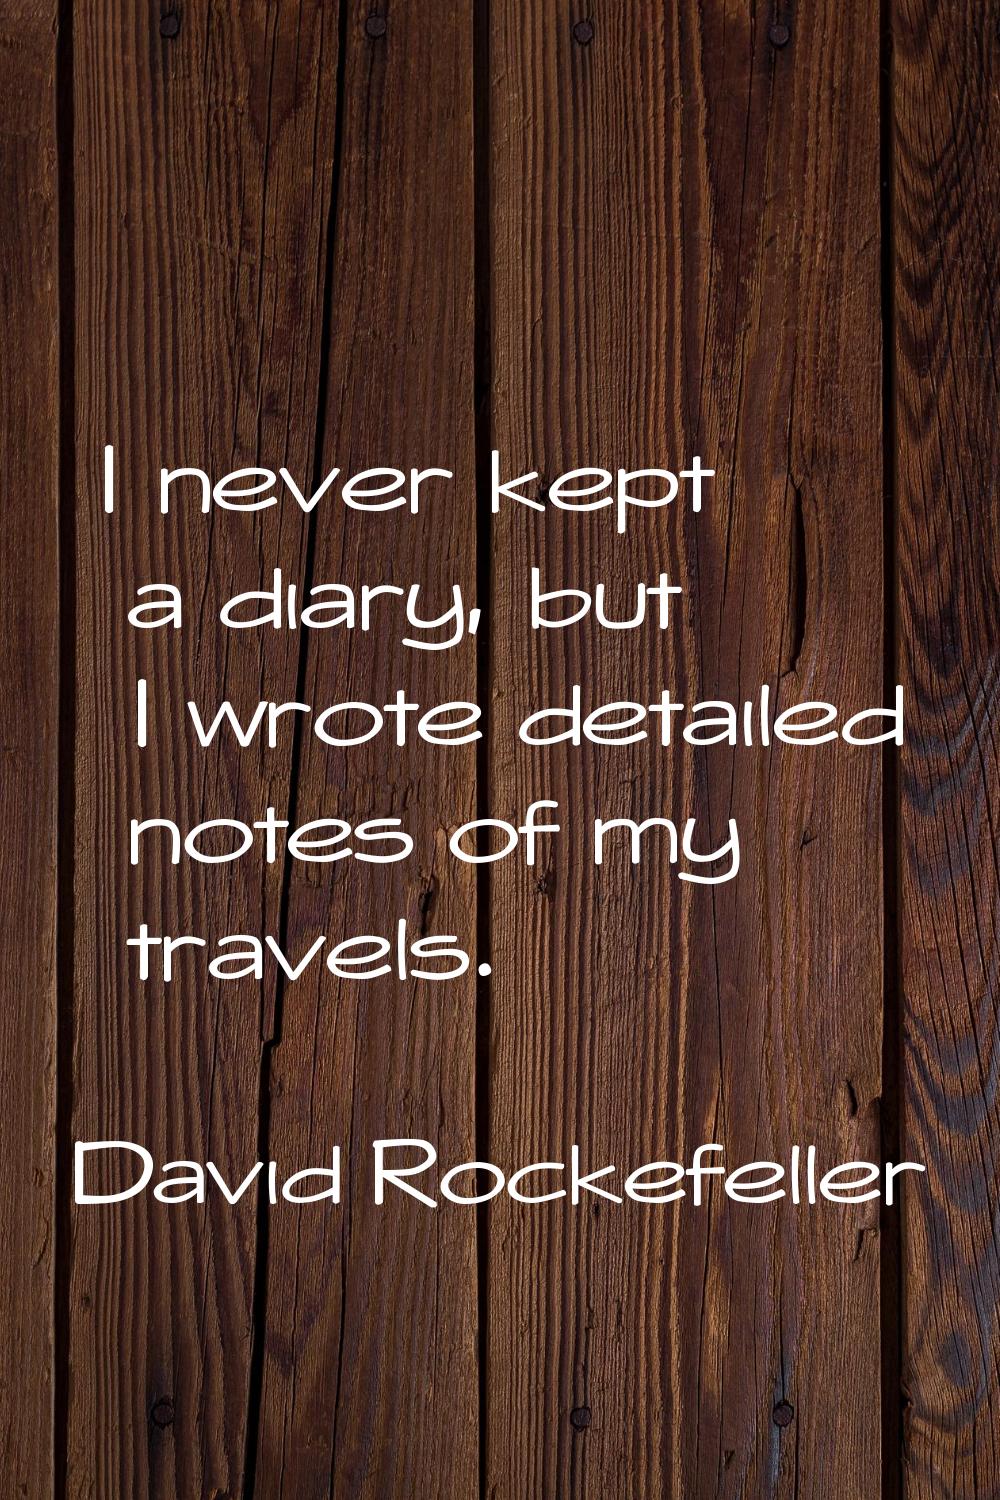 I never kept a diary, but I wrote detailed notes of my travels.